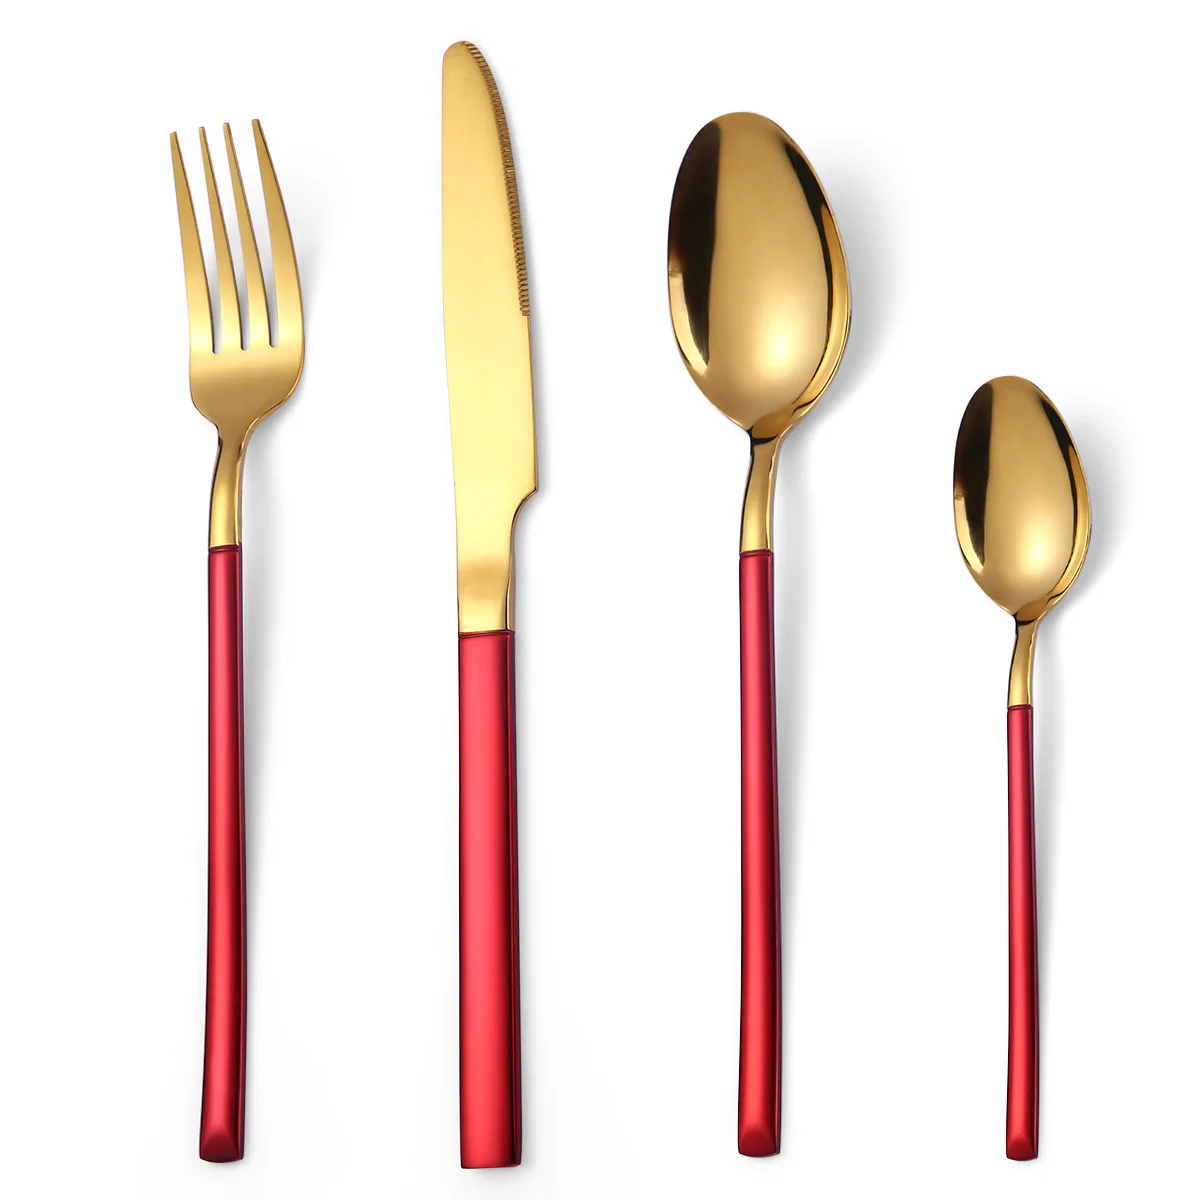 

Red Gold Silverware Set Stainless Steel Flatware Set Spoons Forks Knives Cutlery Utensils Set Service for 4 Mirror Polished